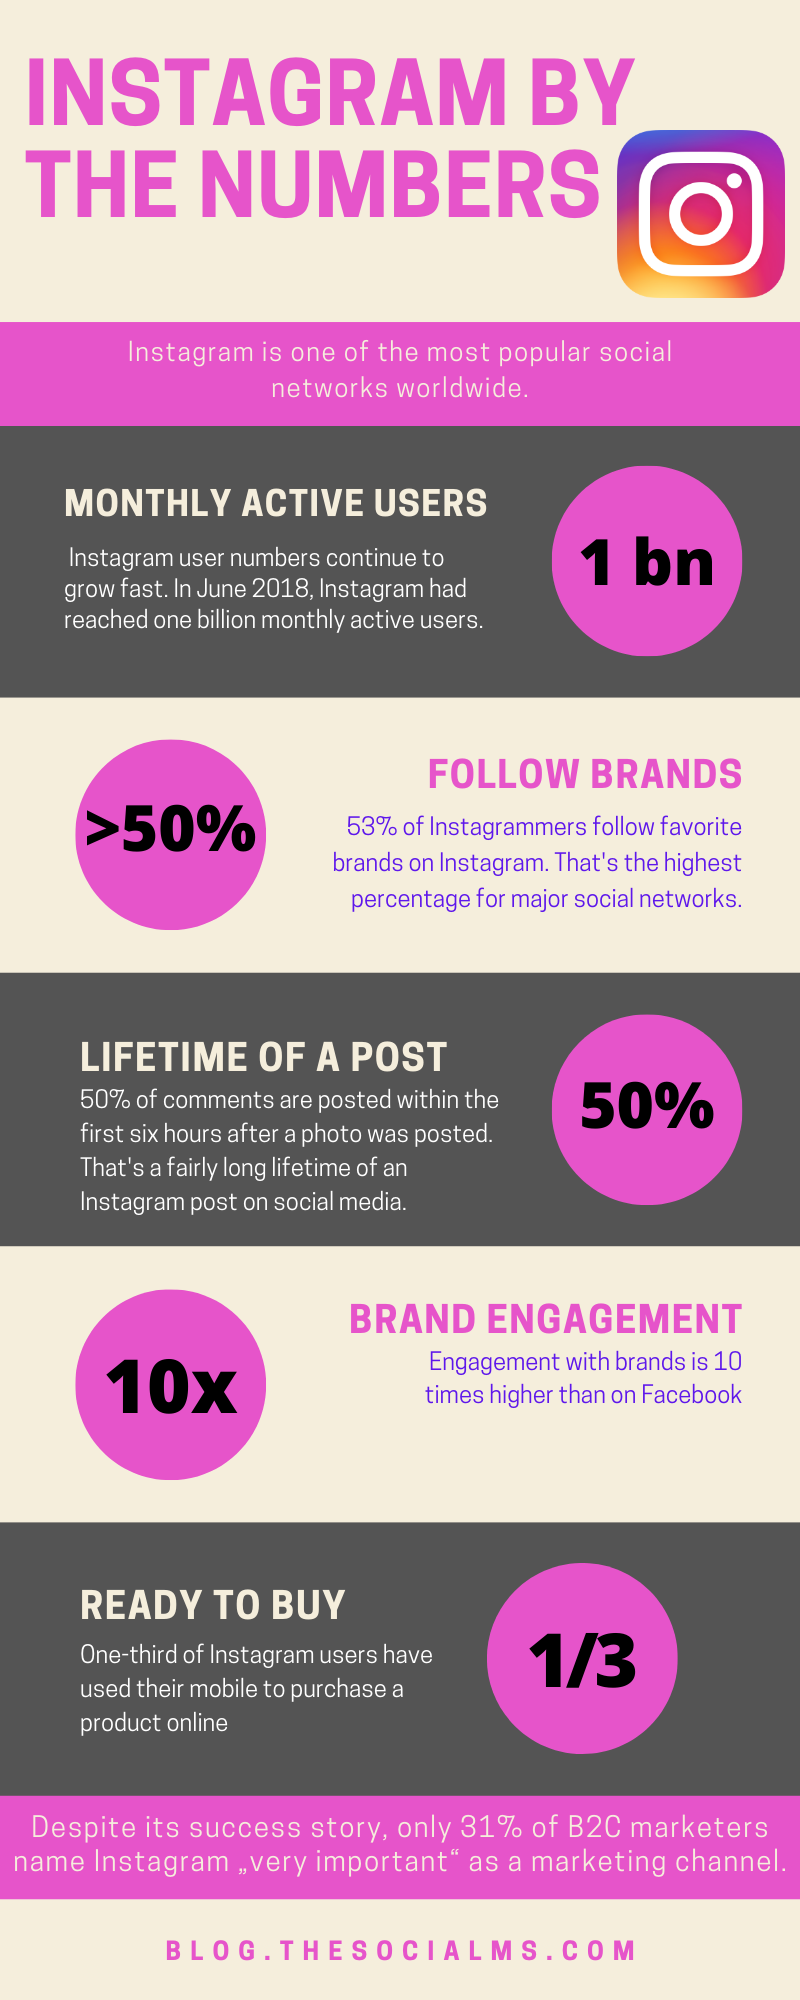 Here are some facts and numbers that can tell you a lot about Instagram and the marketing potential it has. #instagram #instagramfacts #instagramstatistics #instagramtips #instagrammarketing #infographic #socialmedia #socialmediatips #socialmediafacts